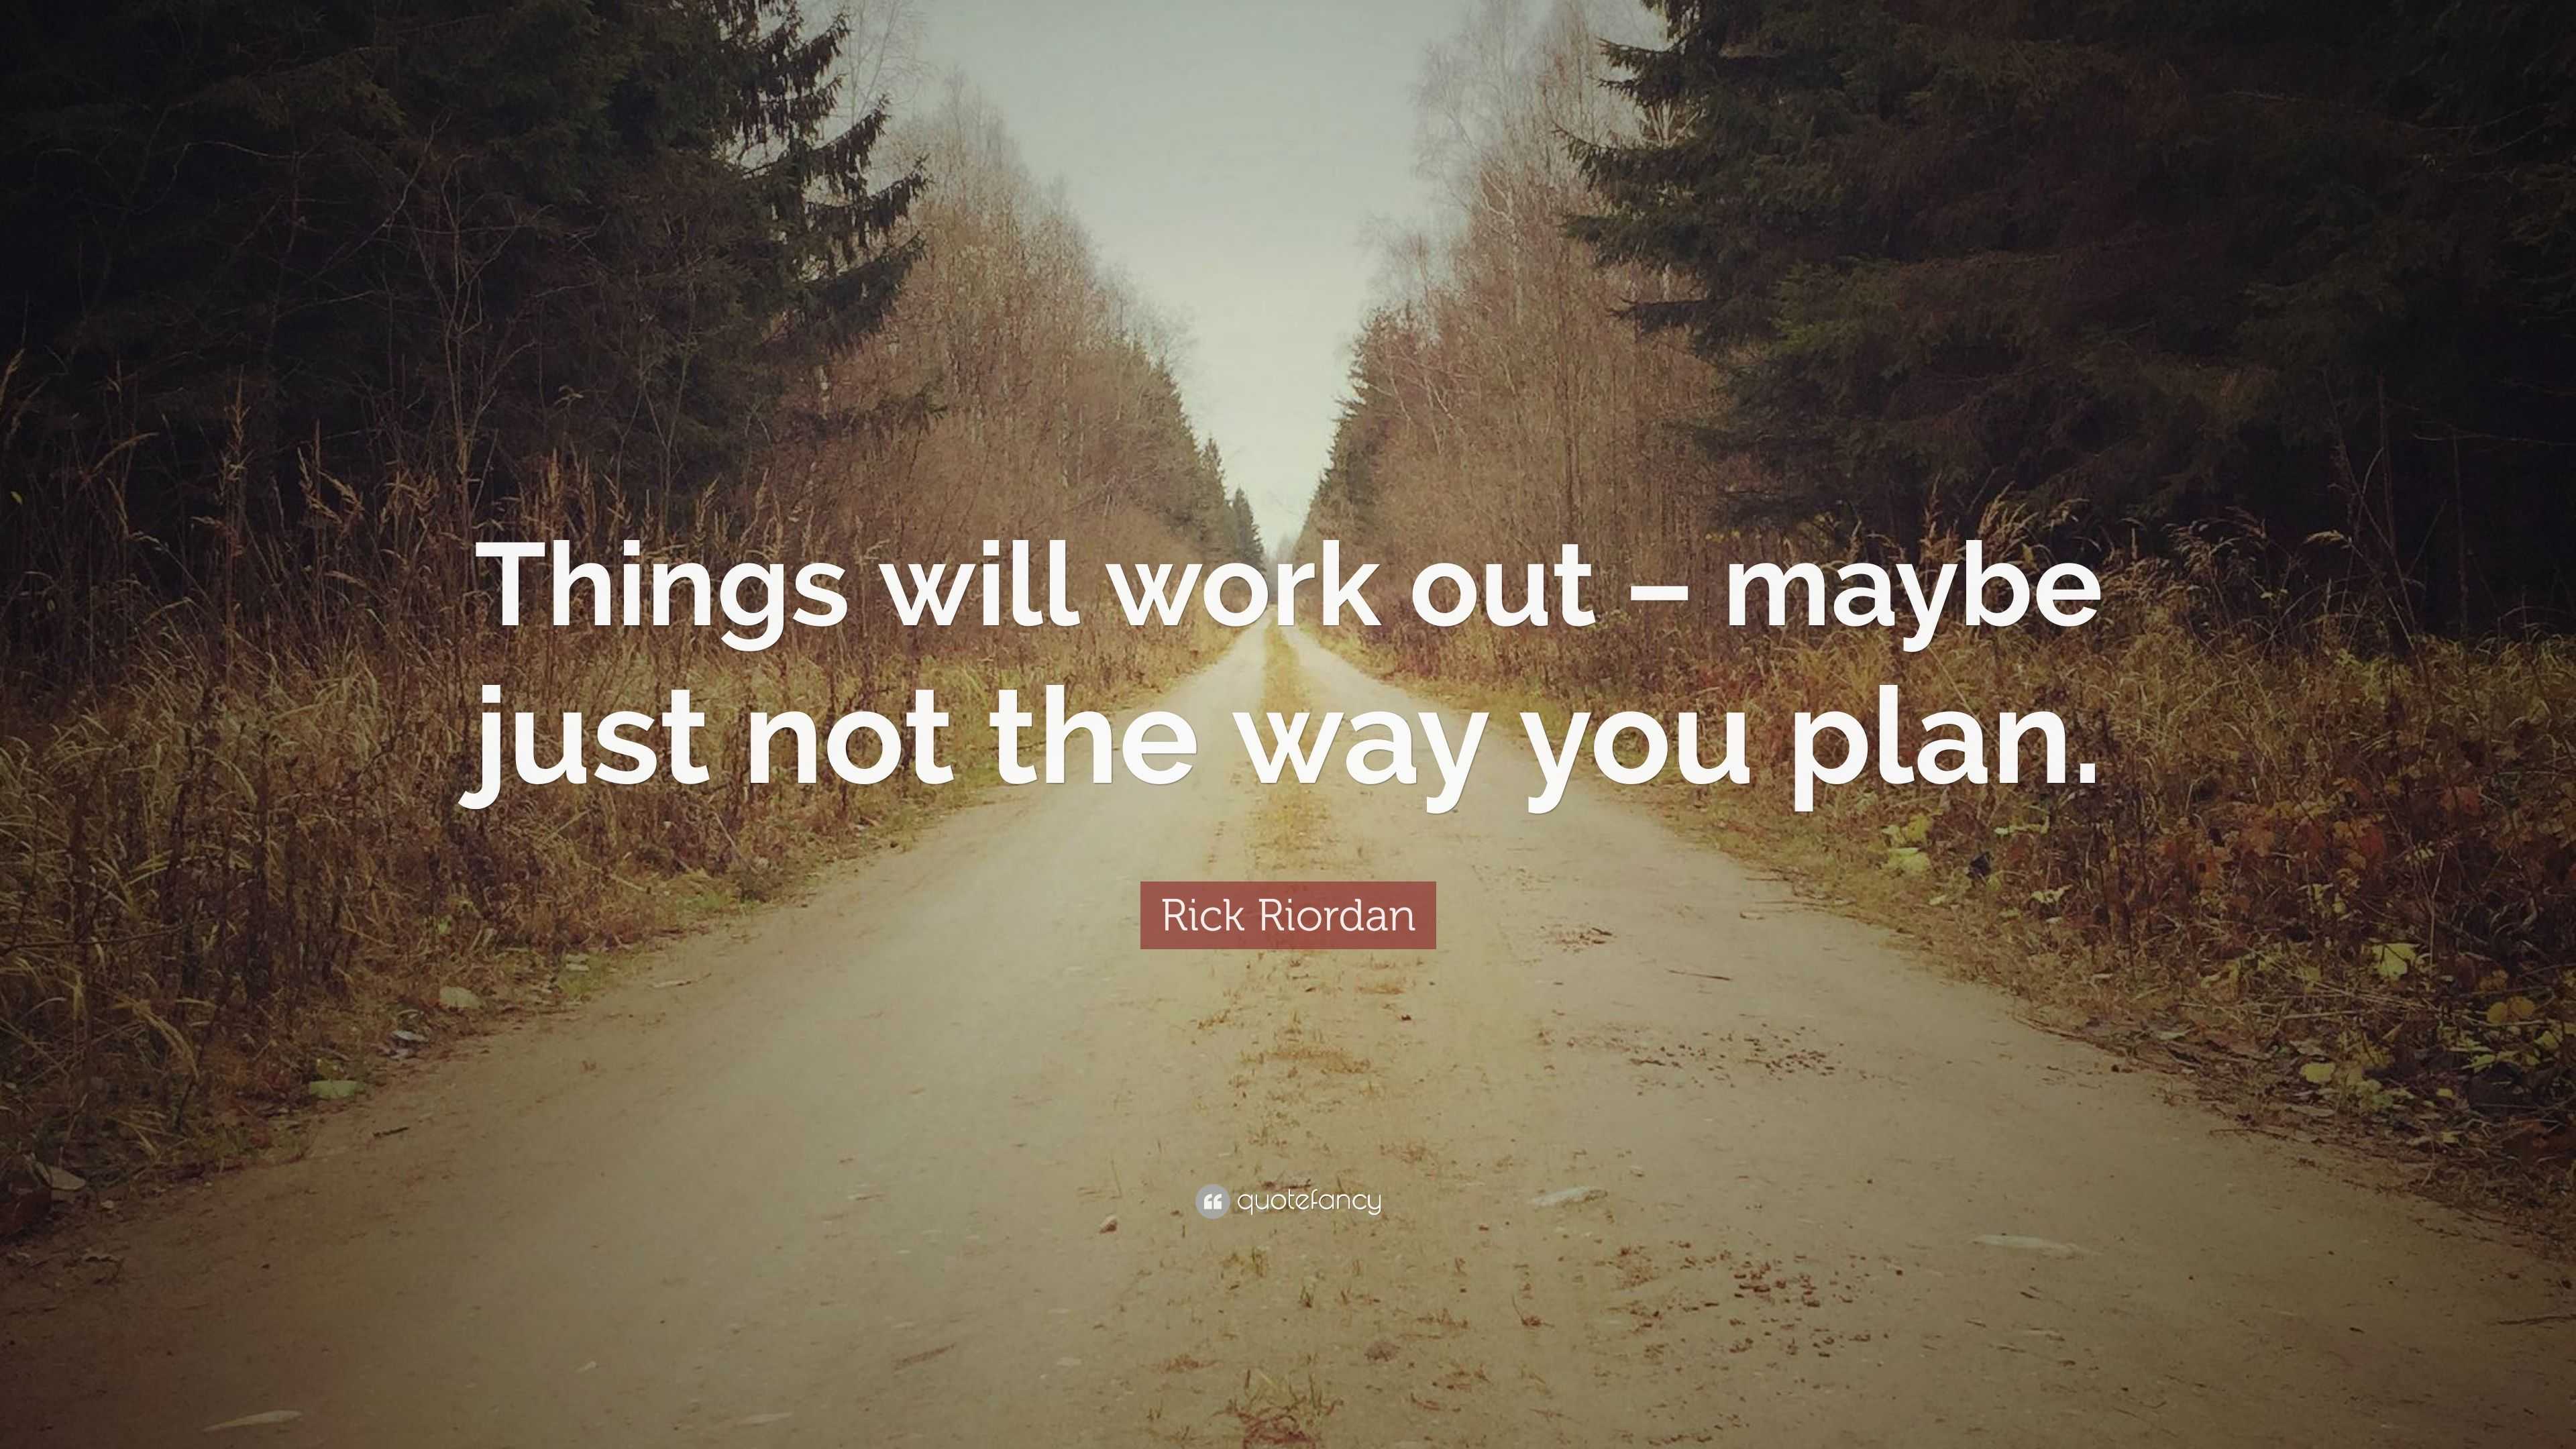 Rick Riordan Quote “things Will Work Out Maybe Just Not The Way You